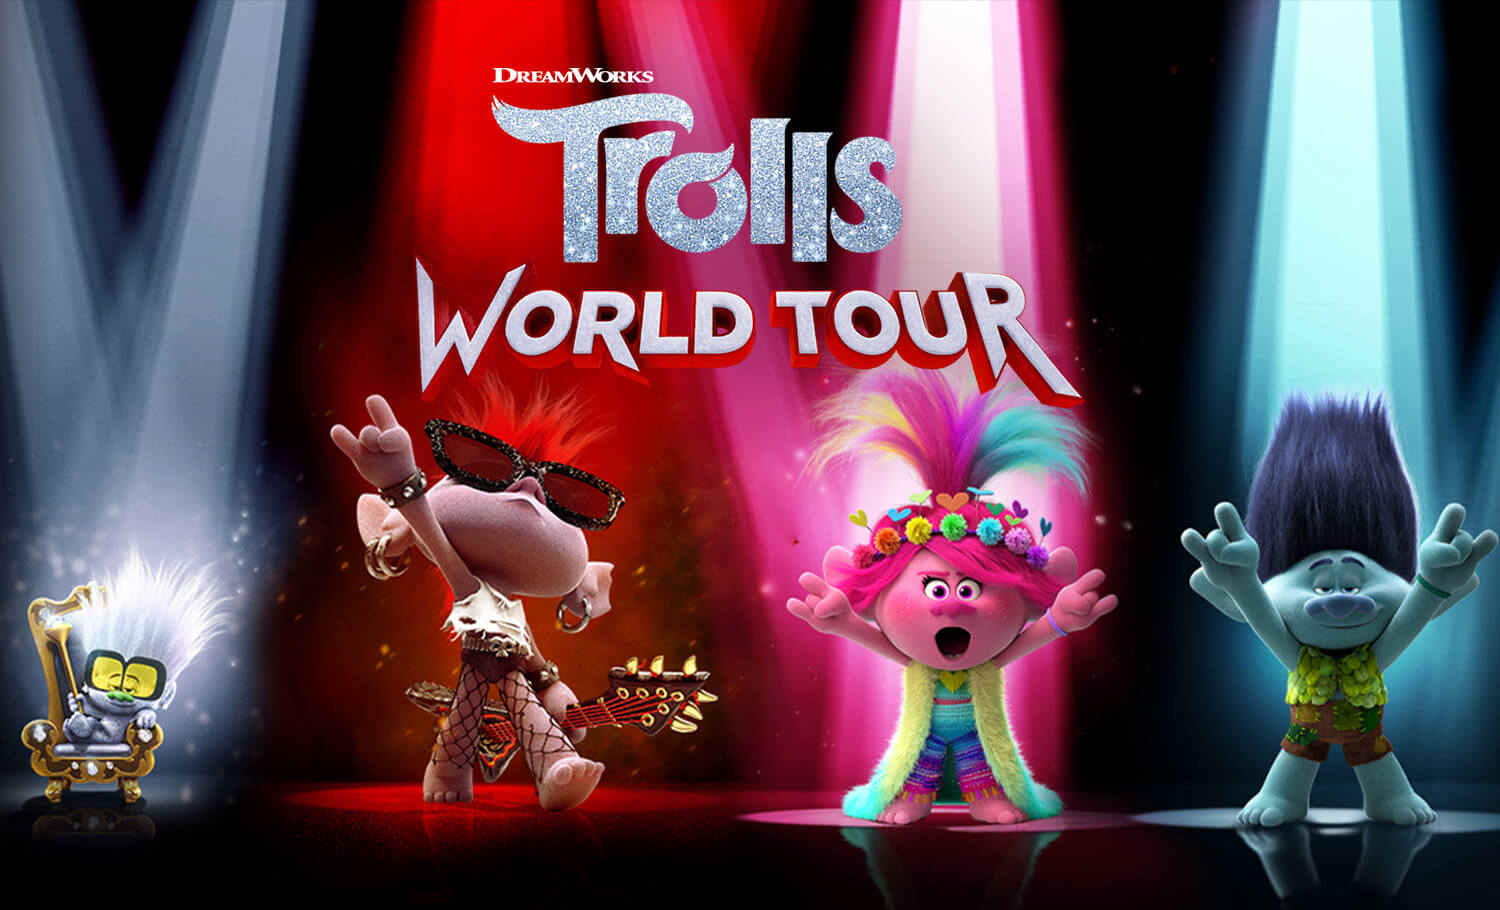 Trolls World Tour | Watch Now | Universal Pictures